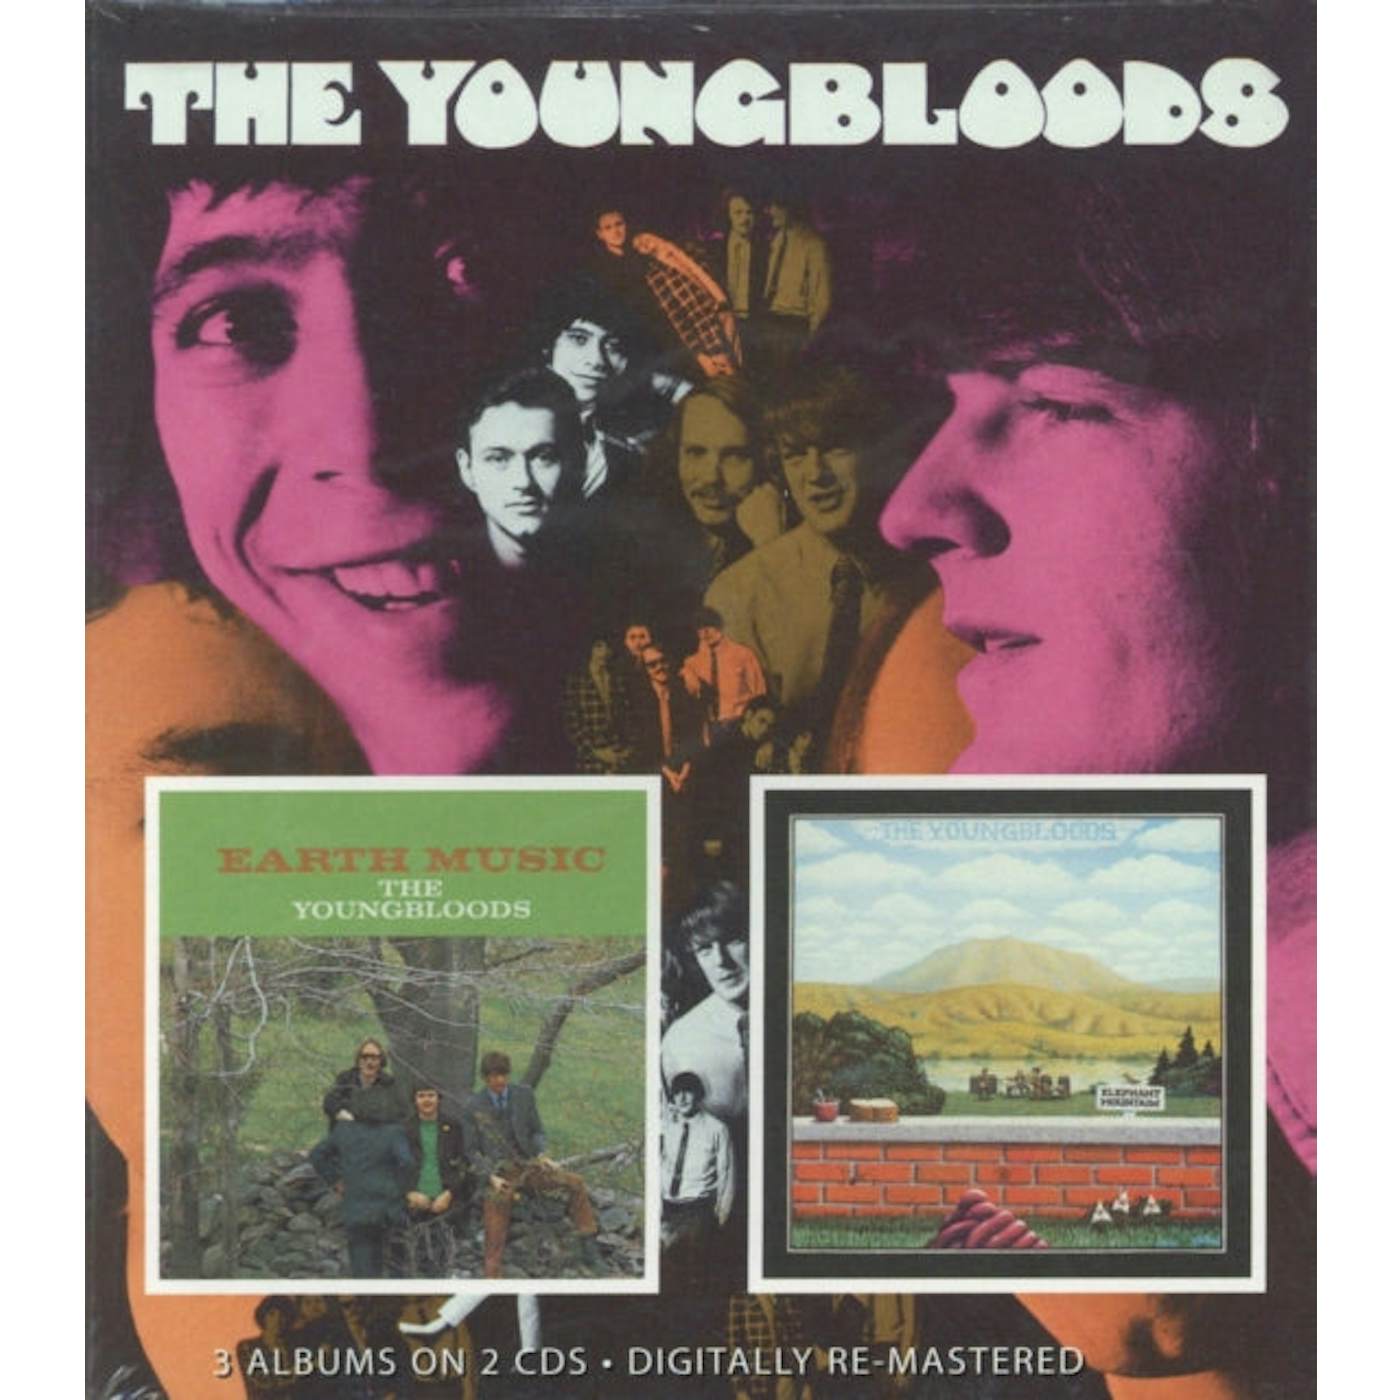 The Youngbloods CD - Earth Music / Young Bloods / Elephant